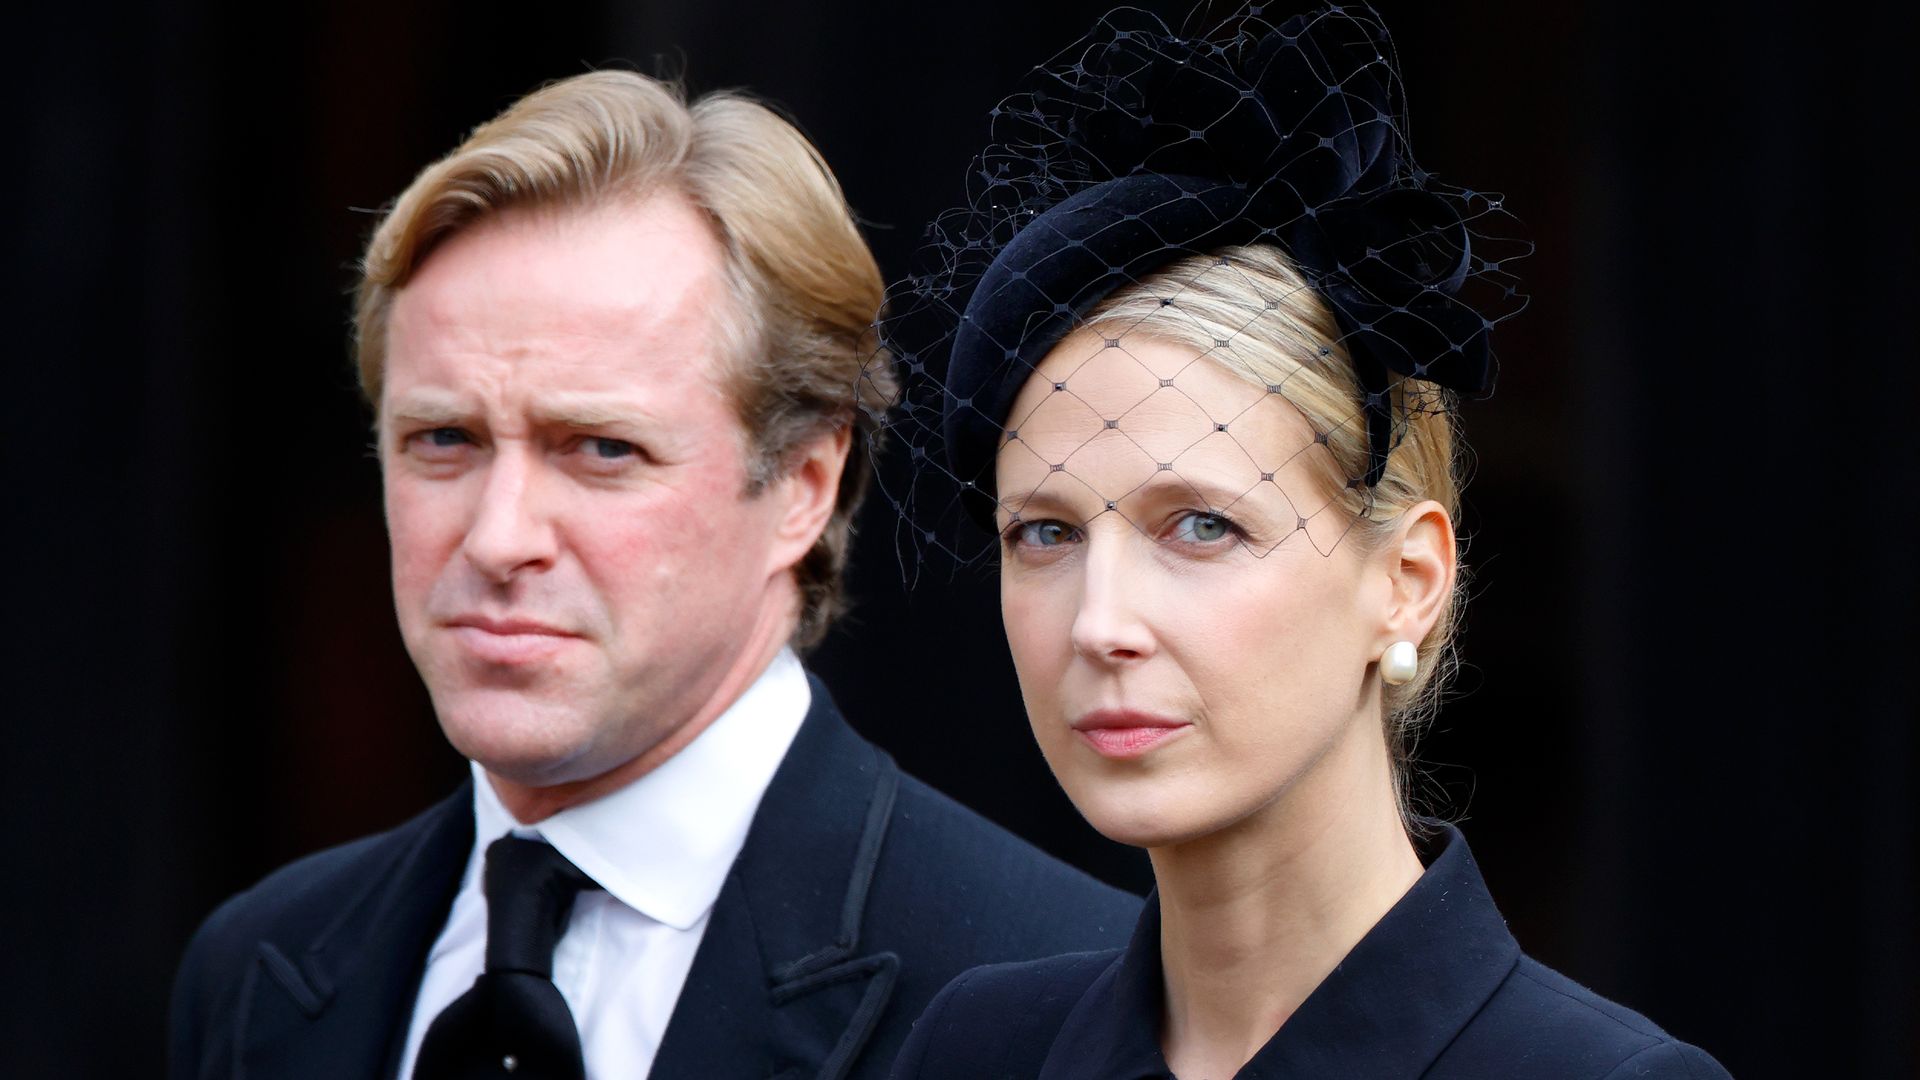 Thomas Kingston and Lady Gabriella Kingston attend the Committal Service for Queen Elizabeth II at St George's Chapel, Windsor Castle on September 19, 2022